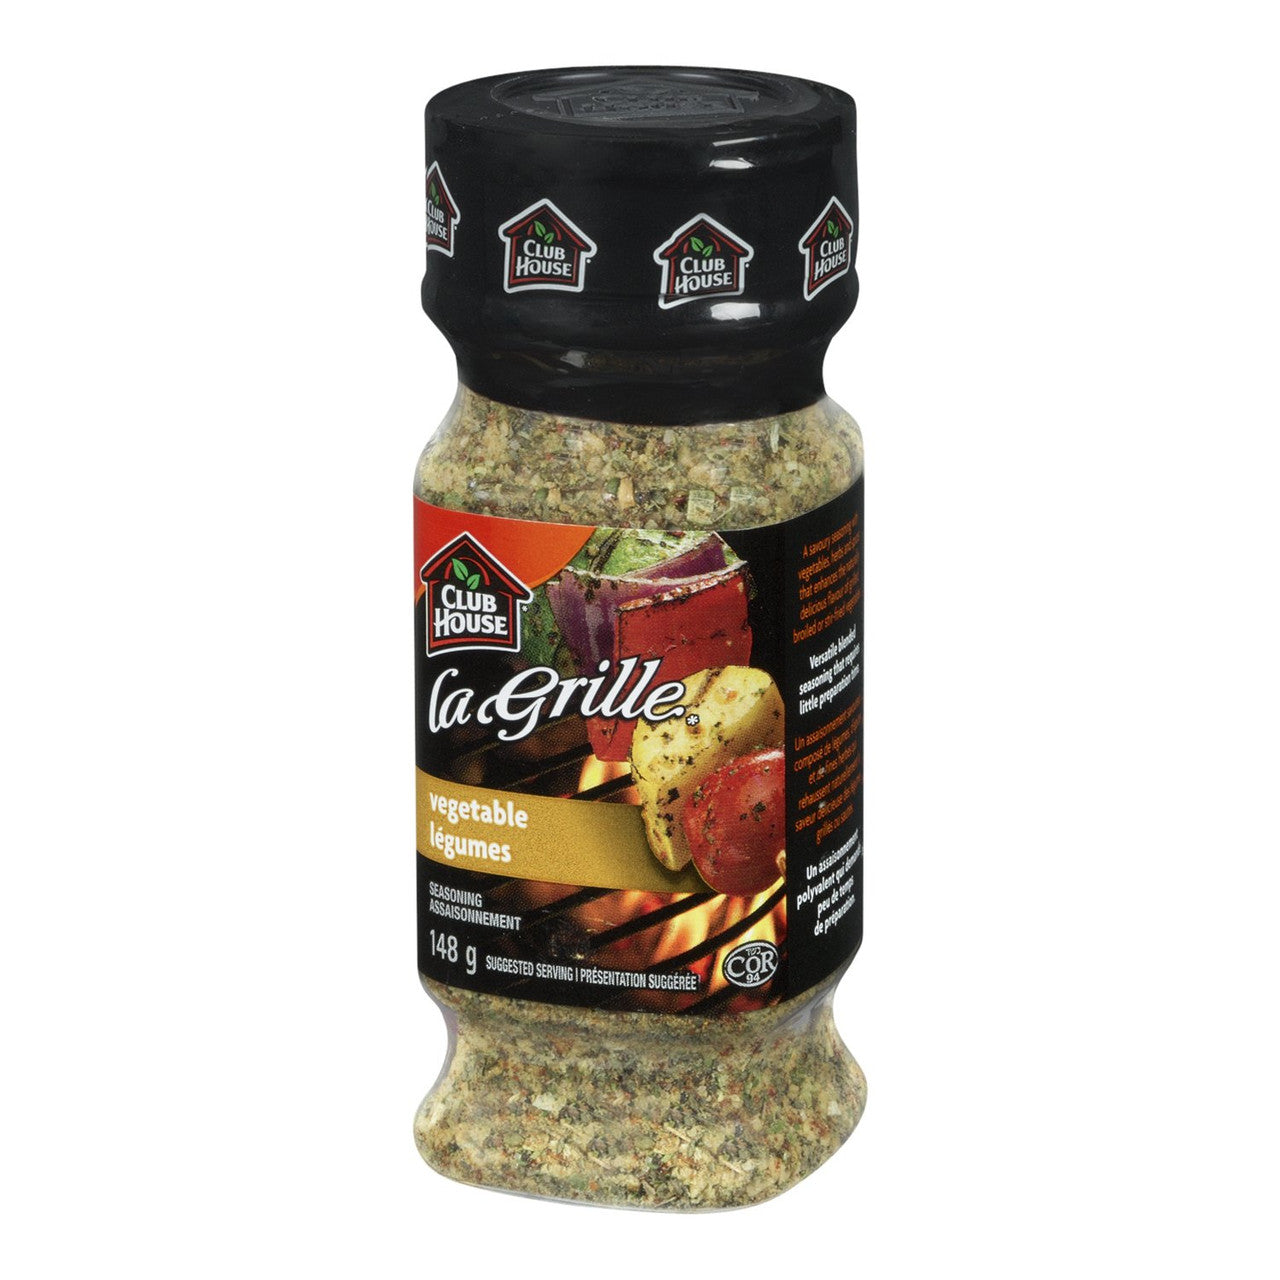 Club House La Grille Vegetable Seasoning,148g/5.22oz {Imported from Canada}